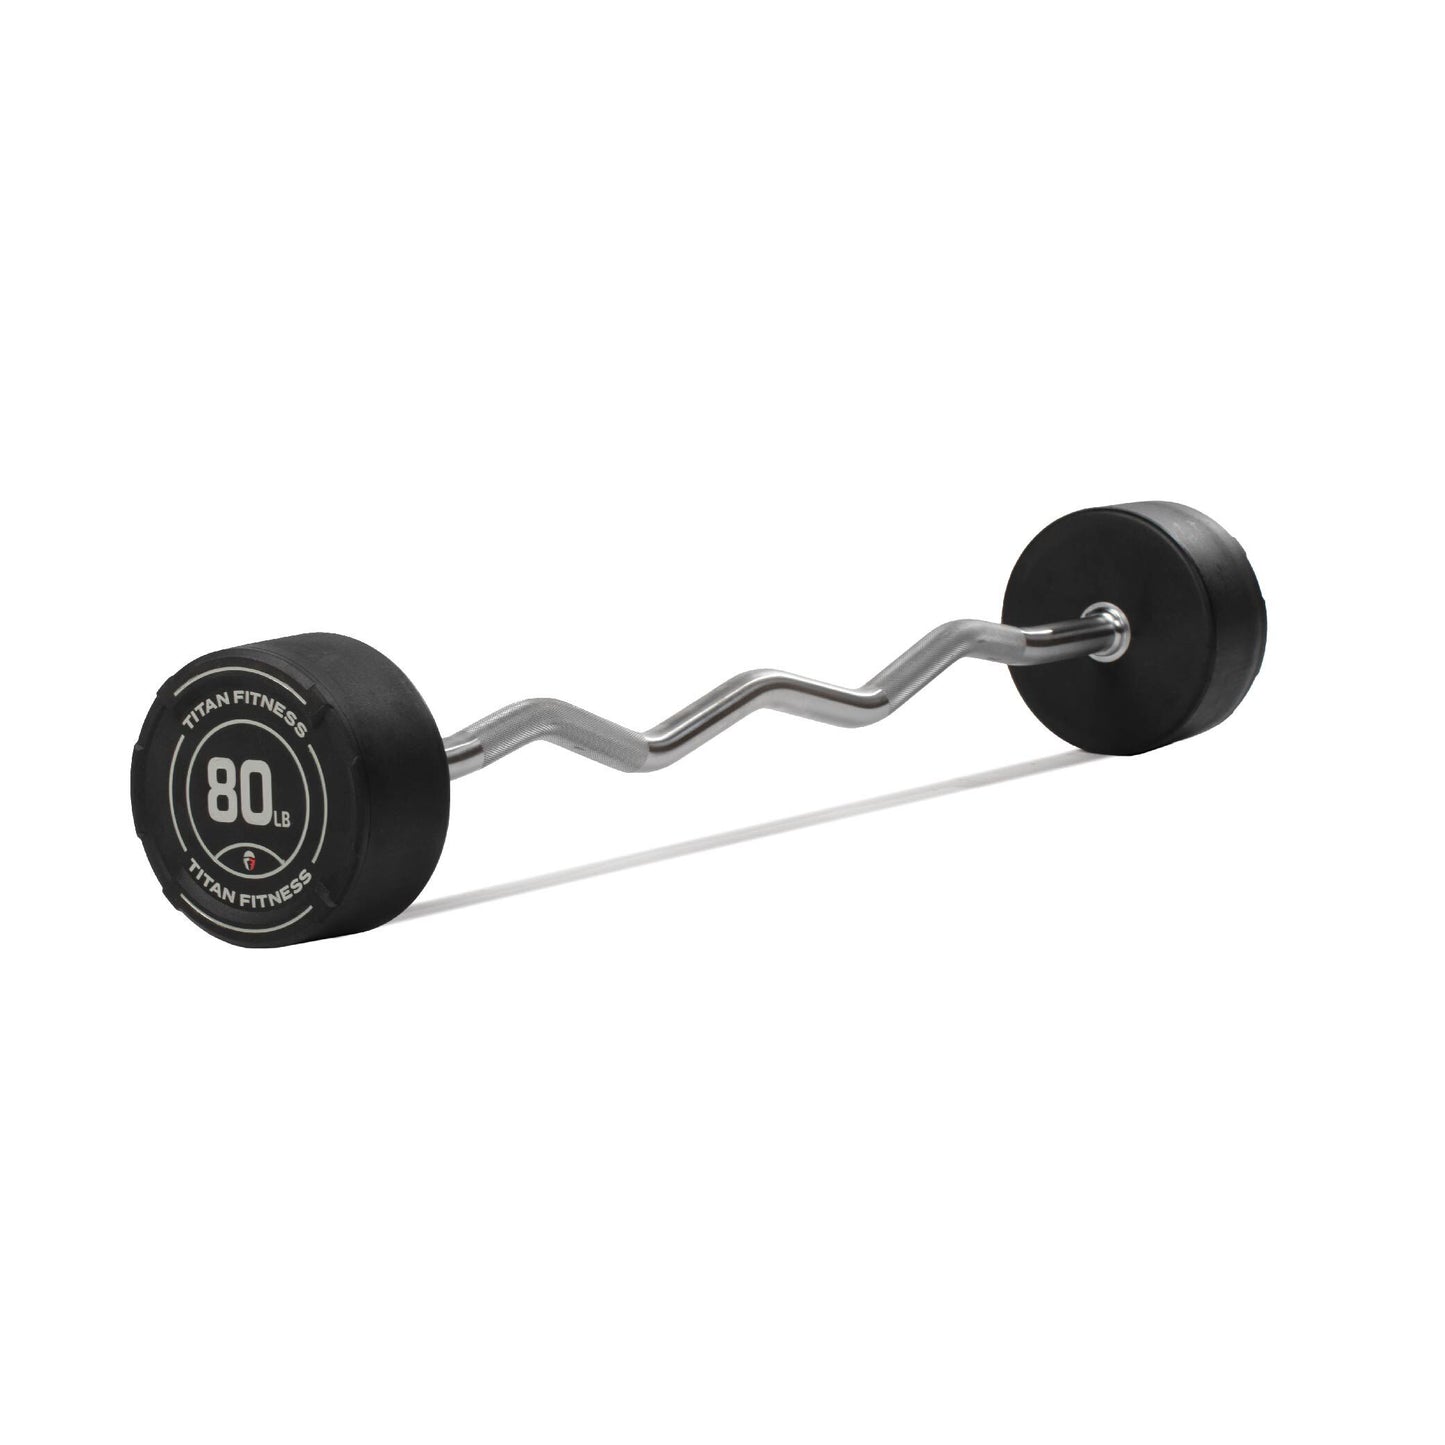 80 LB EZ Curl Fixed Rubber Barbell - view 1